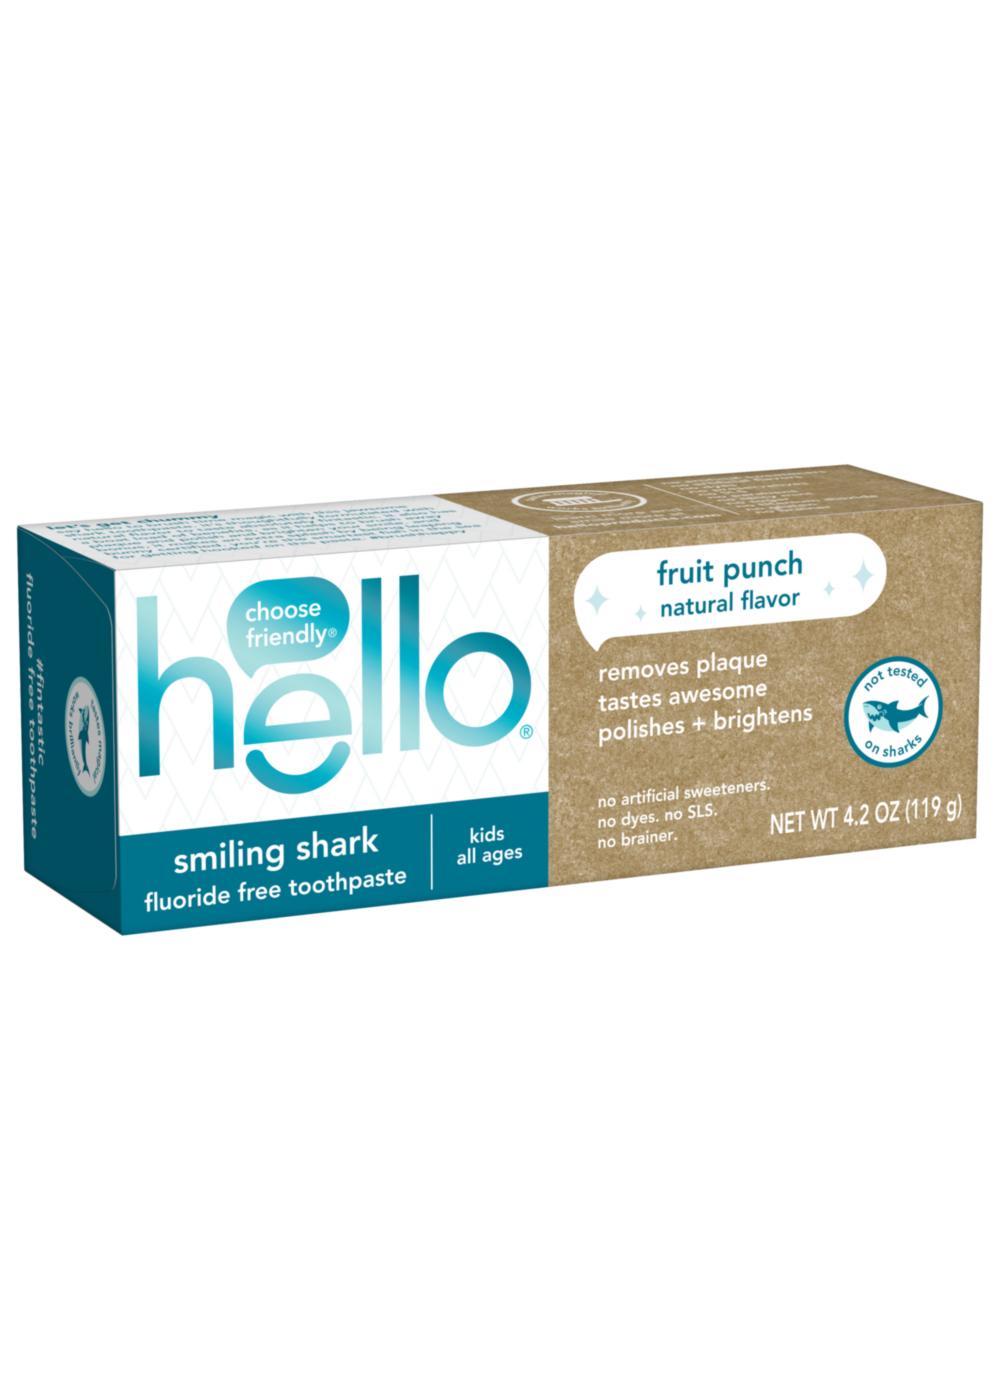 hello Smiling Shark Fluoride Free Toothpaste - Fruit Punch ; image 3 of 4